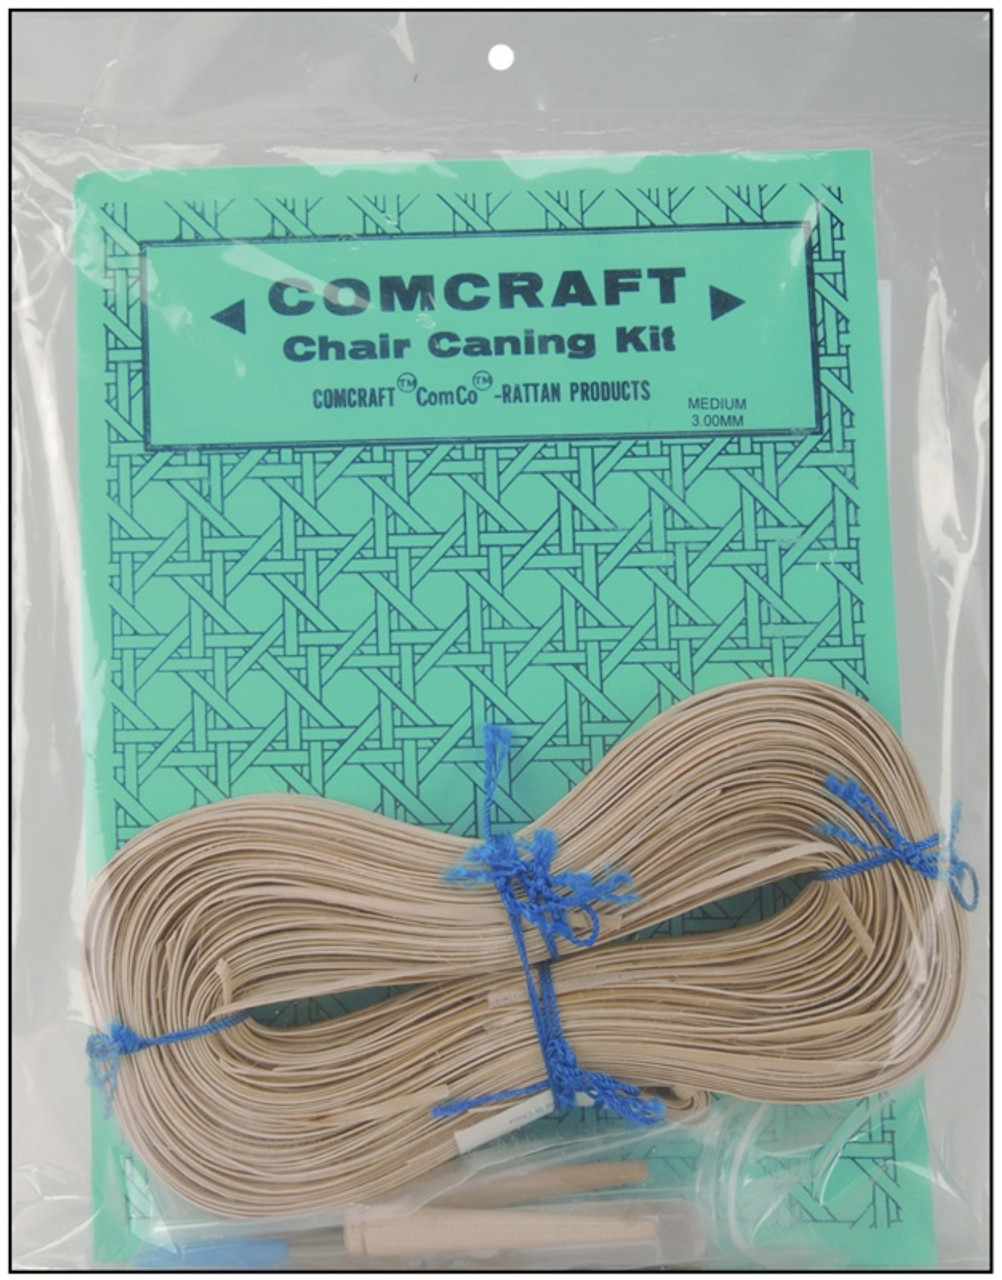 Great deals on basket and caning supplies